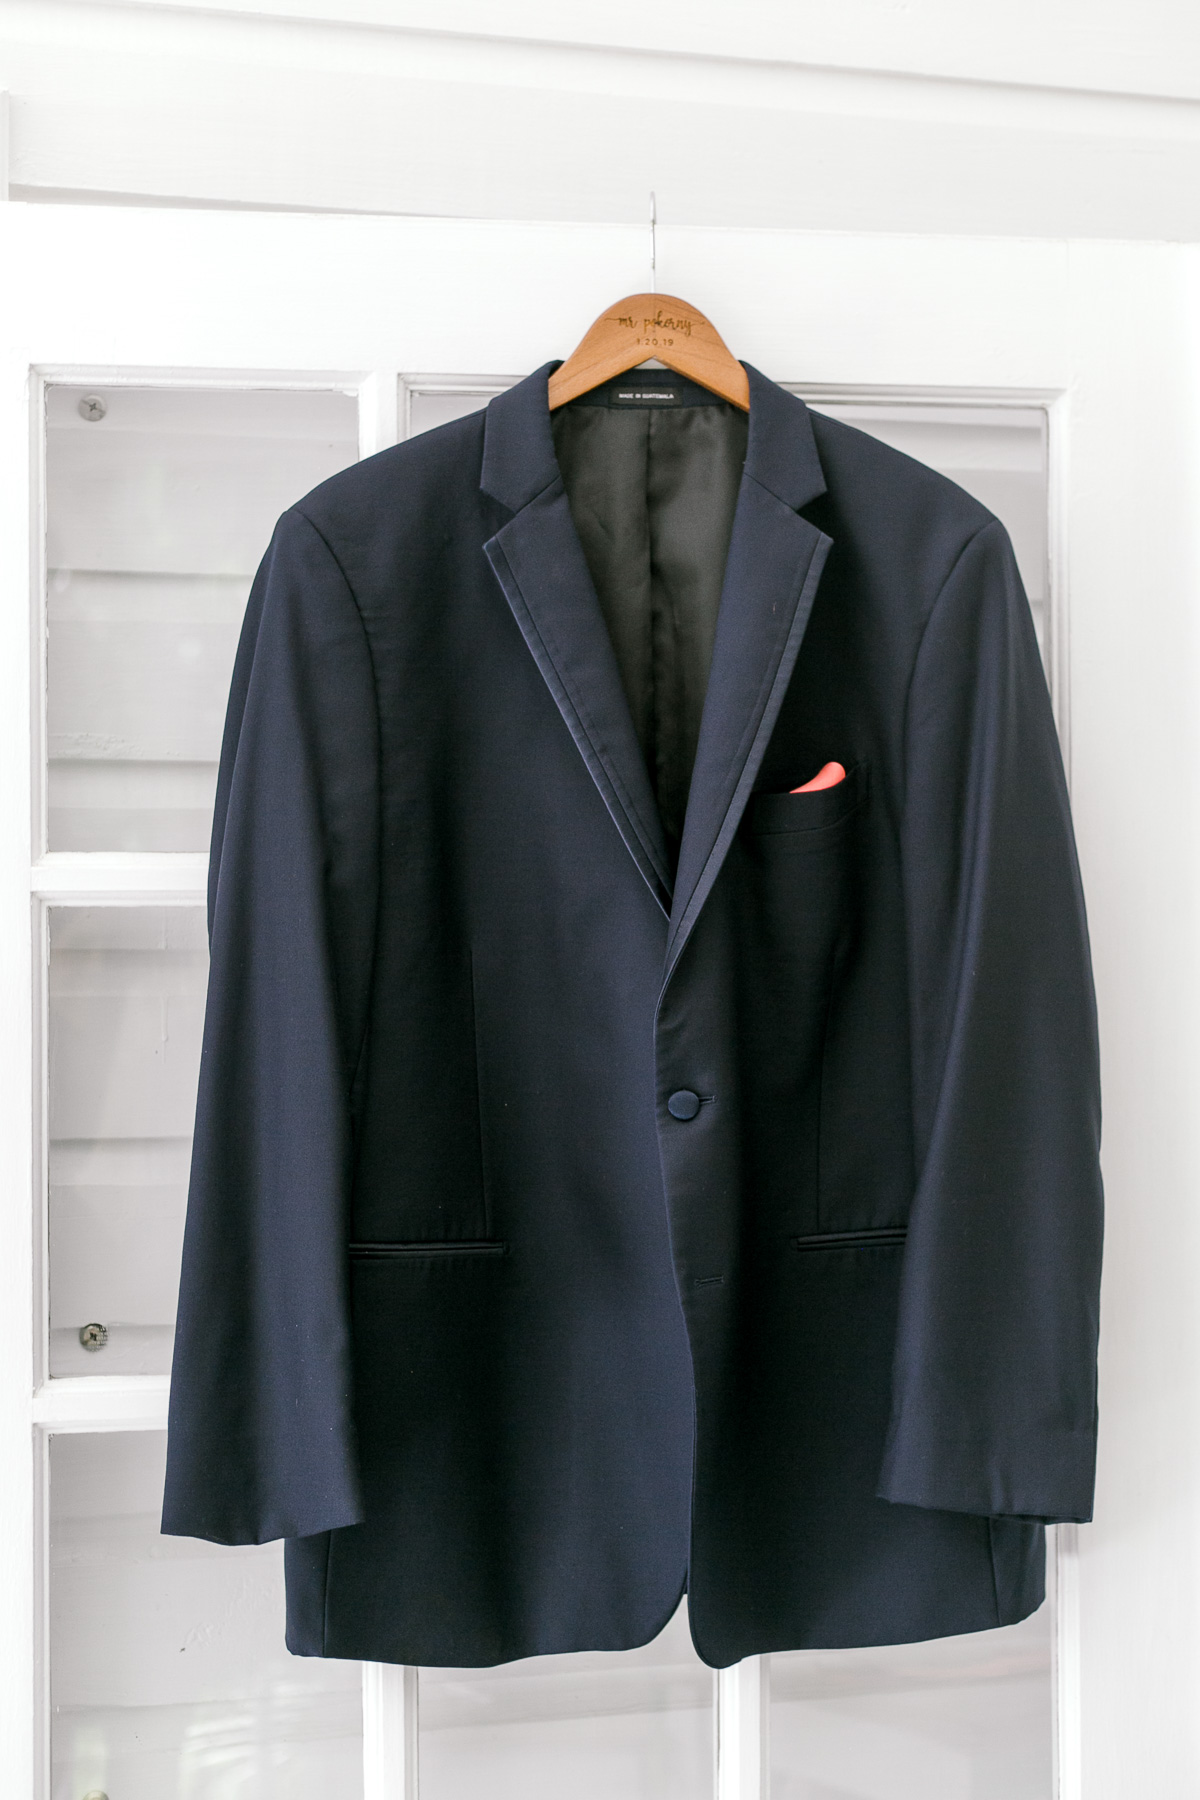 navy blue suit for groom